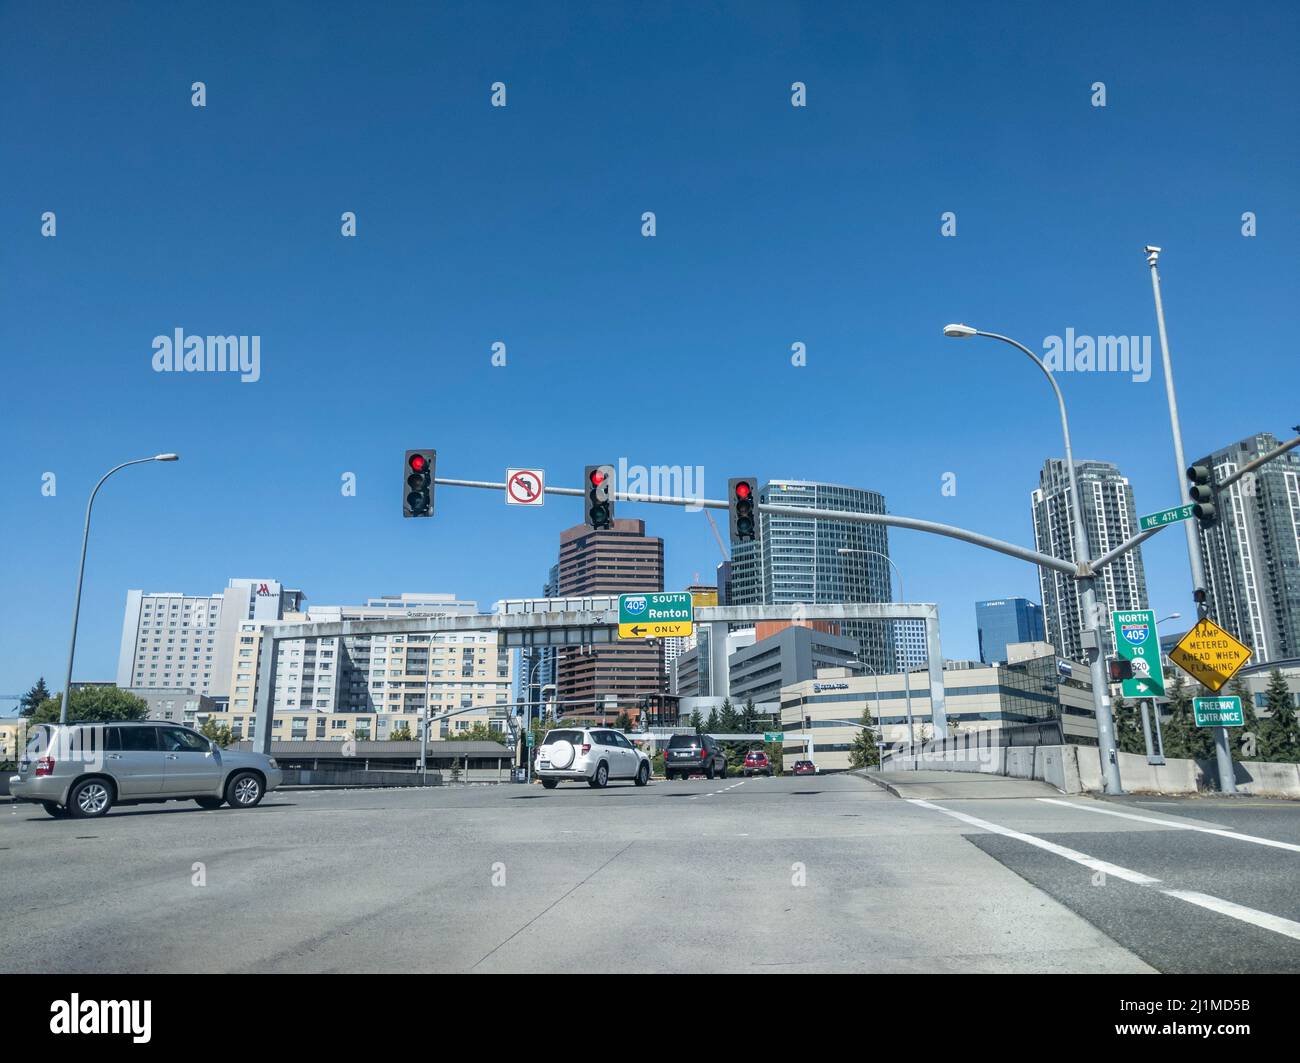 Bellevue, WA USA - circa July 2021: Street view of the entrance ramp to i-405 South above busy downtown traffic on a sunny day. Stock Photo